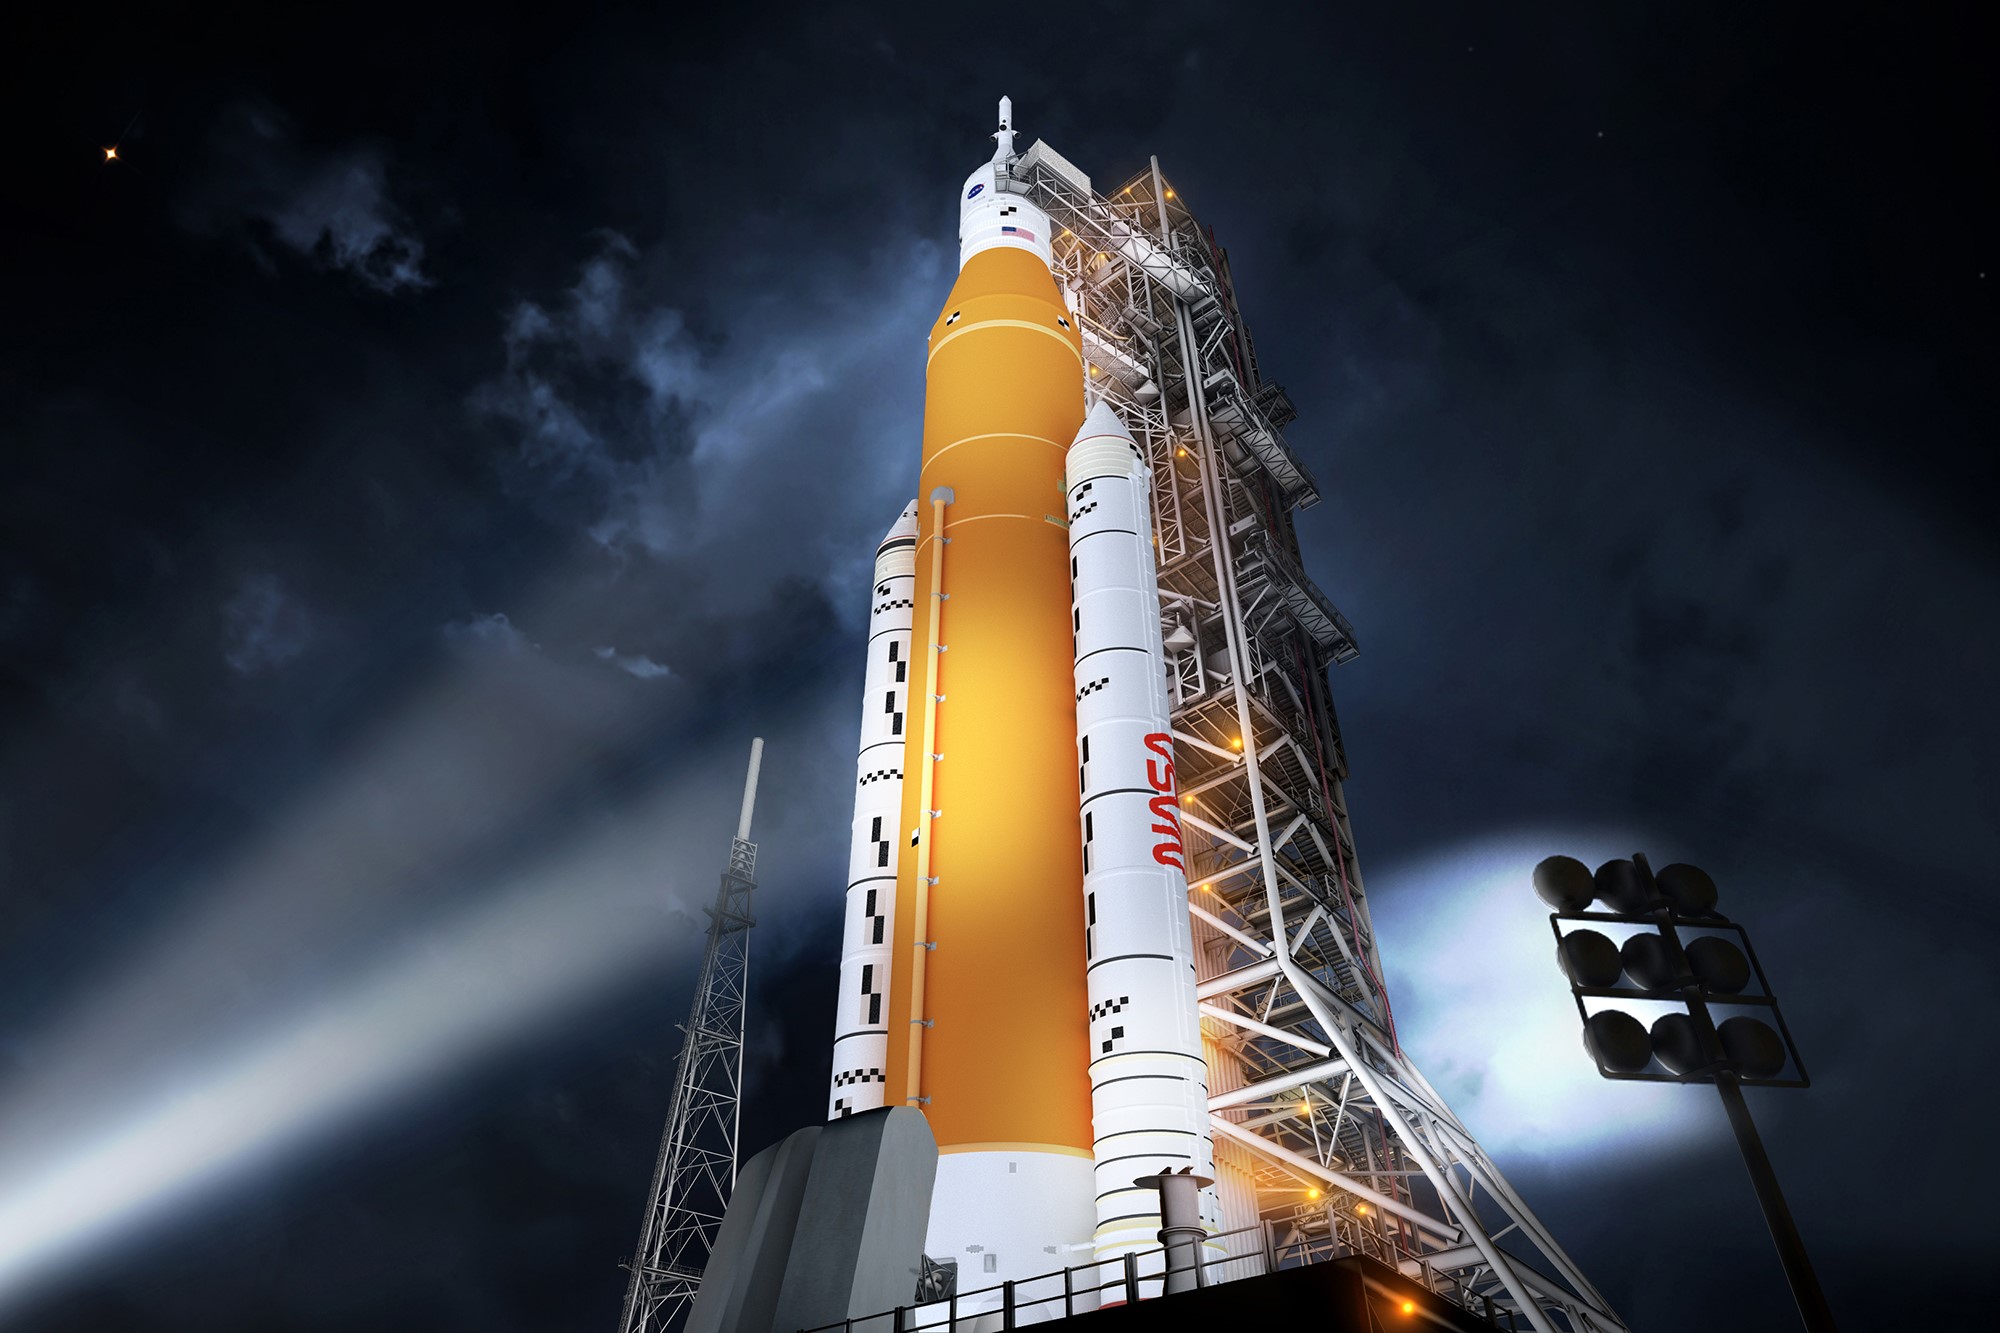 NASA will test a mega-rocket that will take humans back to the moon